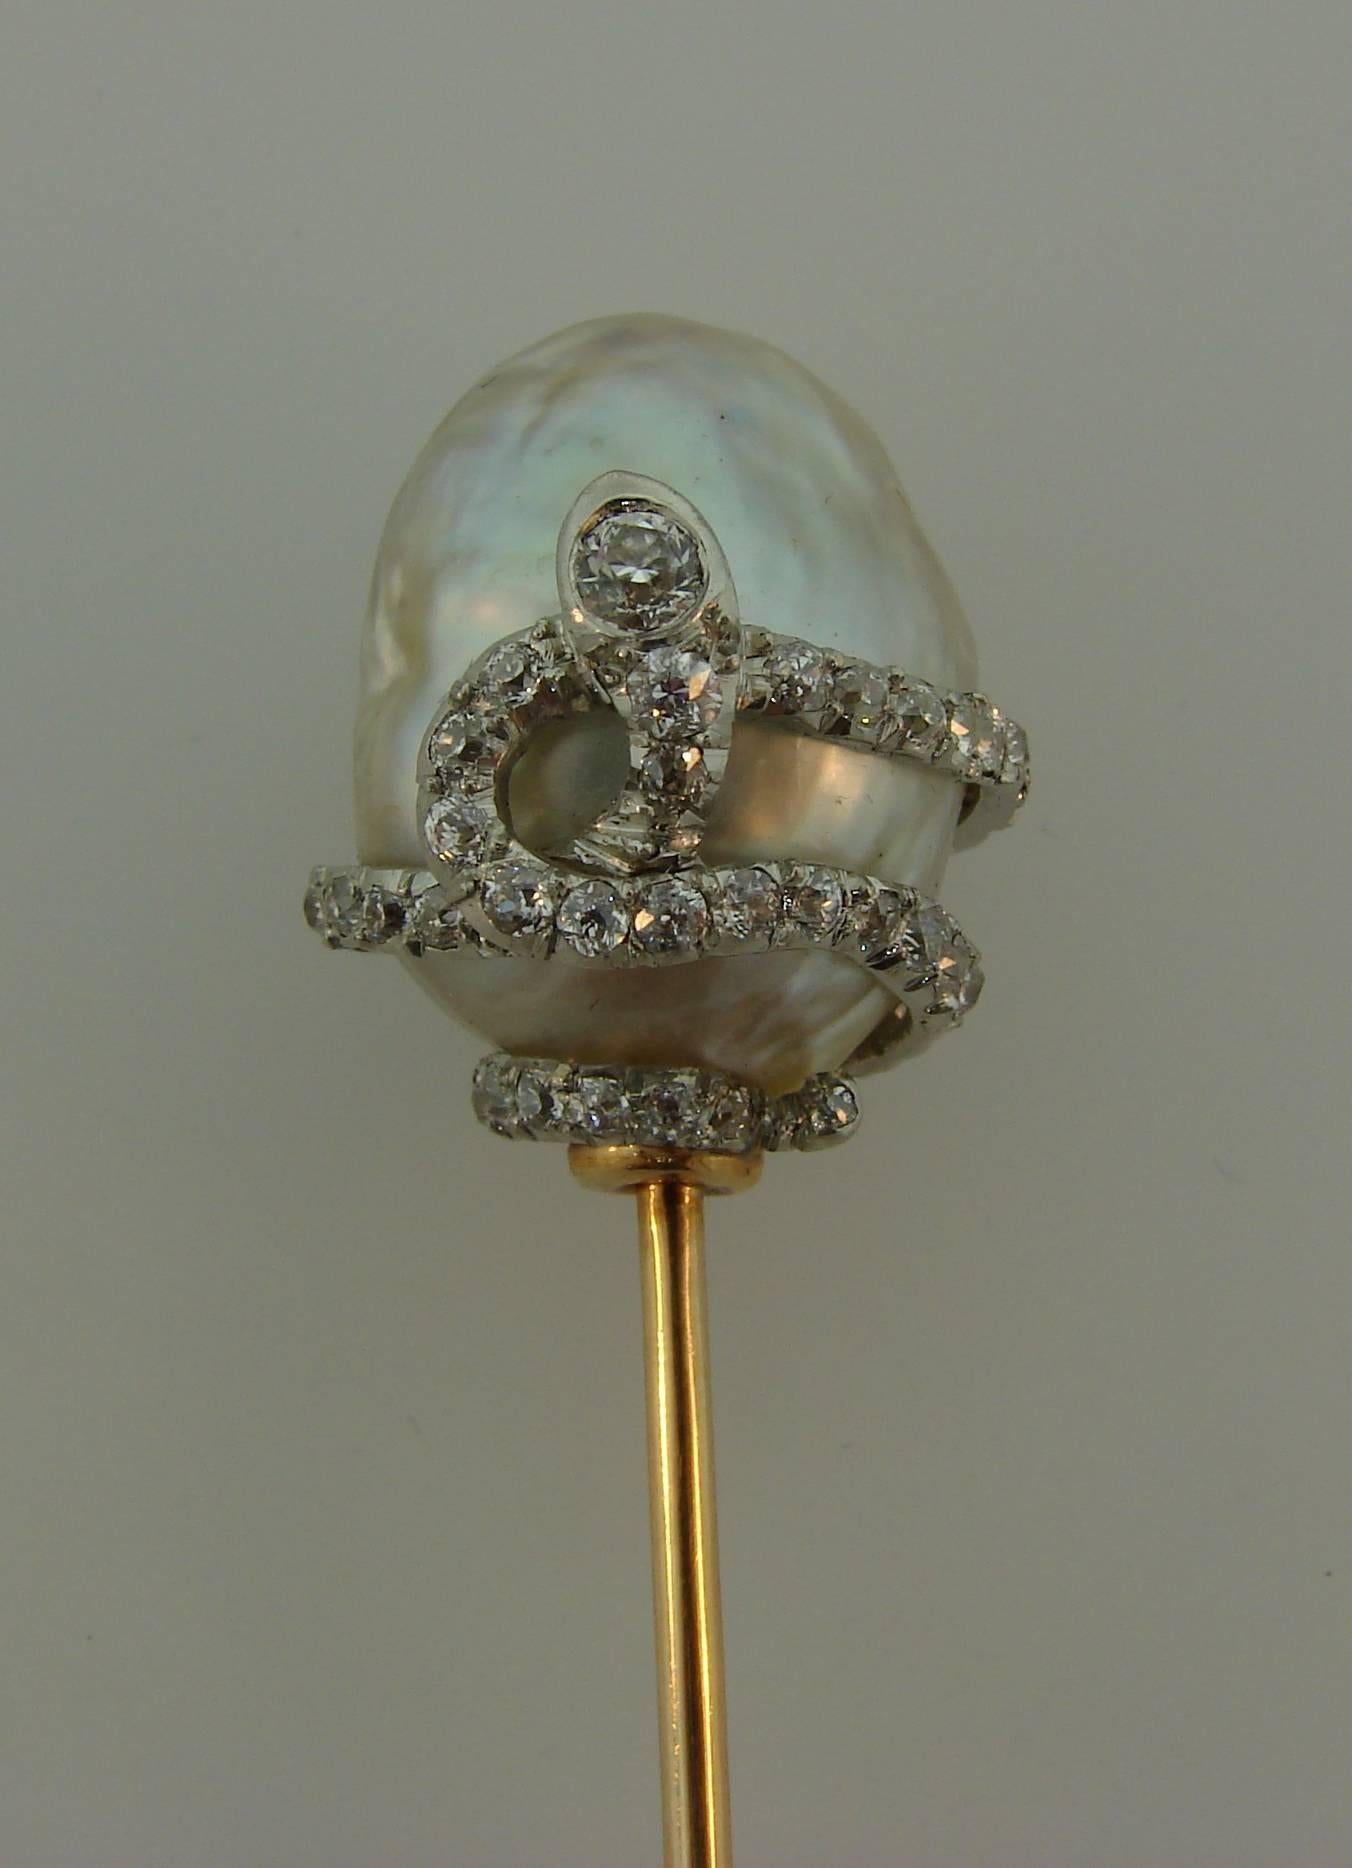 Exquisite hat stick pin created by J. E. Caldwell in the 1910's. It features a natural baroque pearl wrapped with a snake. The snake is made of platinum and set with Old European cut diamonds (J-L color, VS2-SI1 clarity, total weight approximately